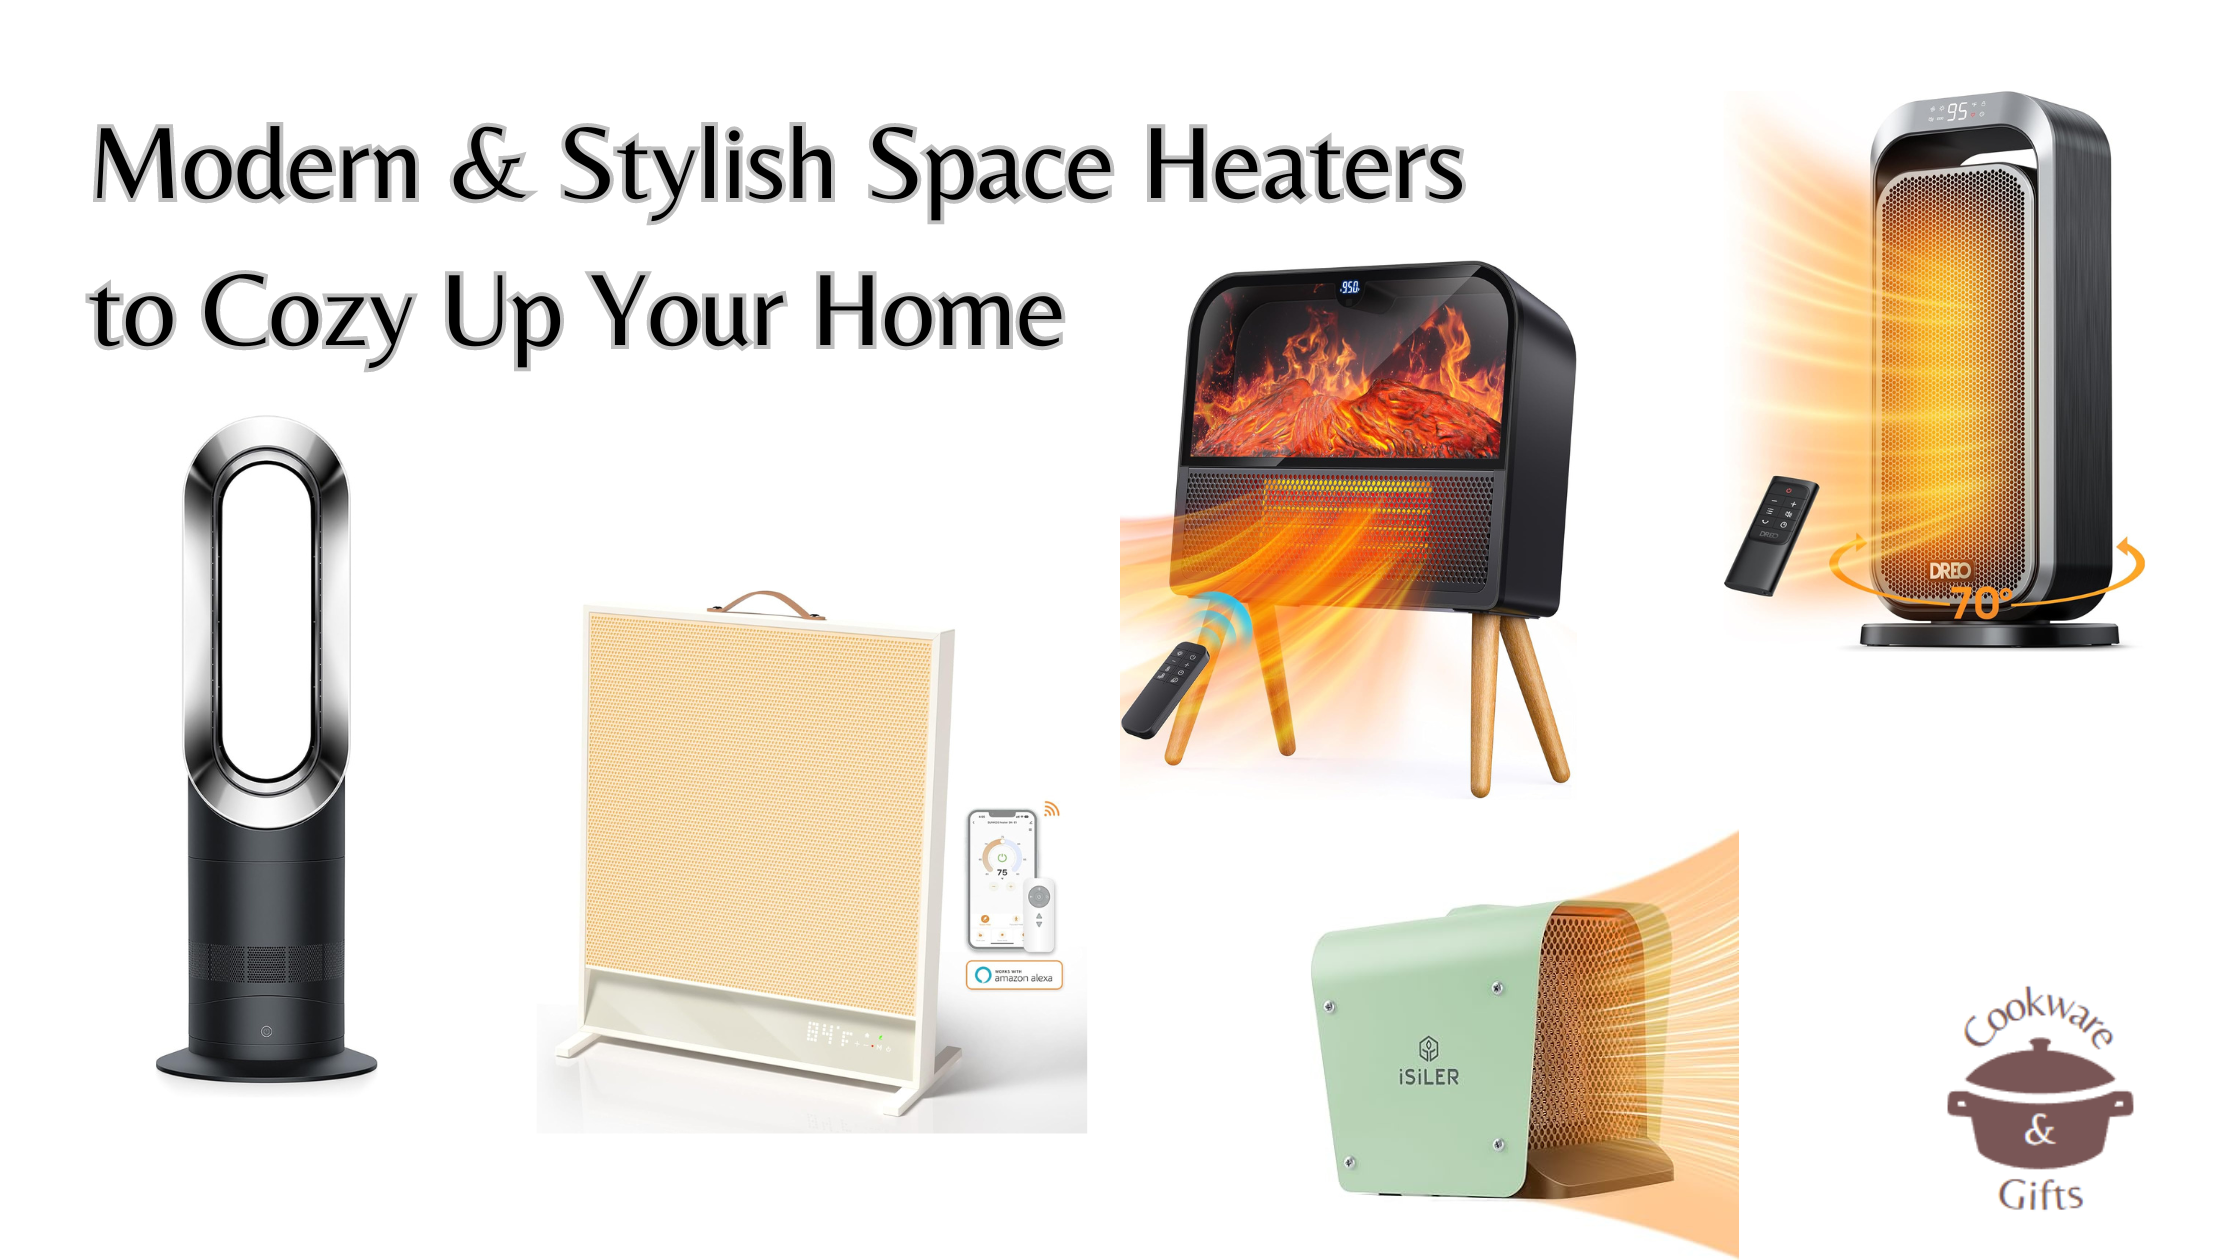 Modern and Stylish Space Heaters You’ll Love to Cozy Up Your Home This Year